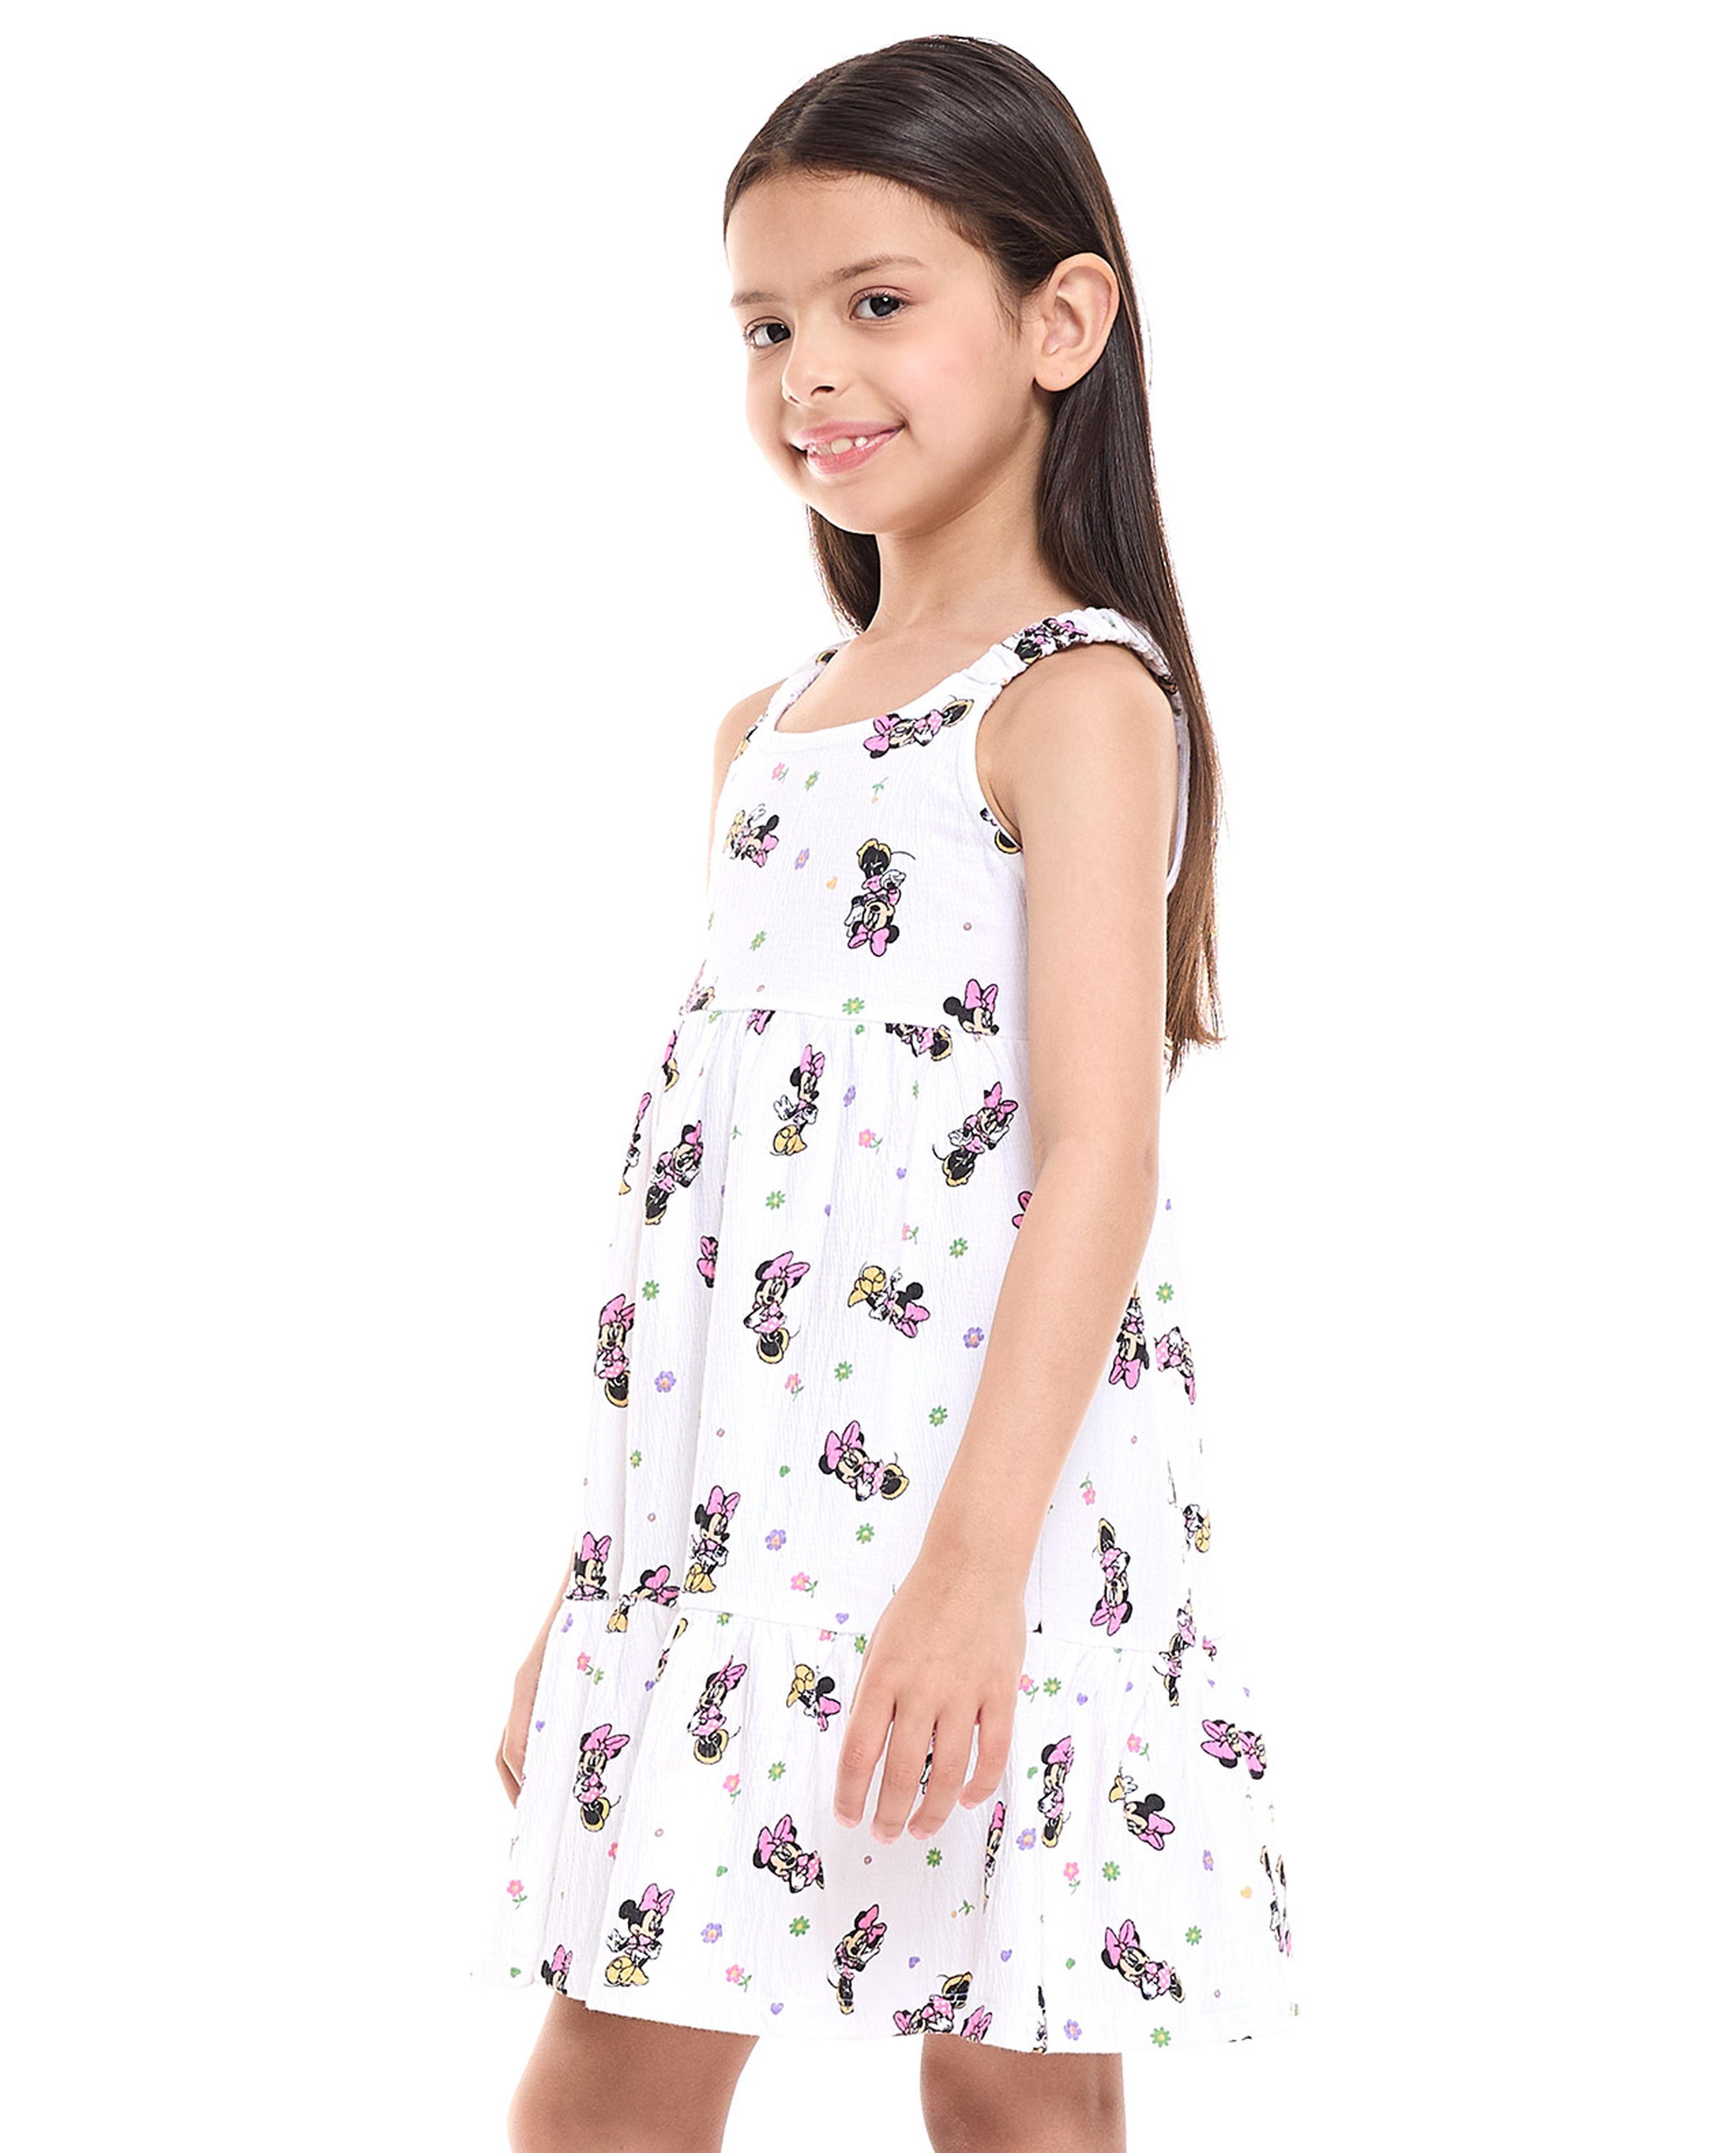 Minnie Mouse Print Strappy Fit and Flare Dress